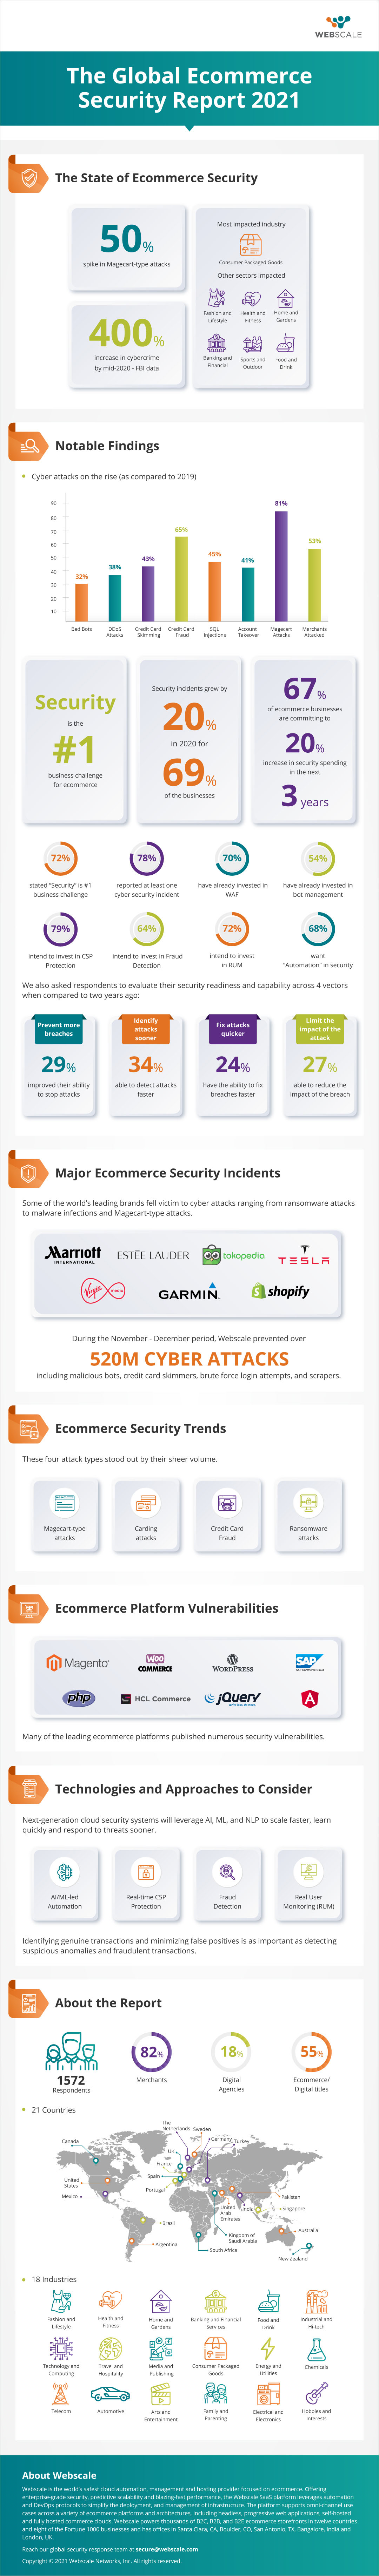 The 2021 Global Ecommerce Security Report